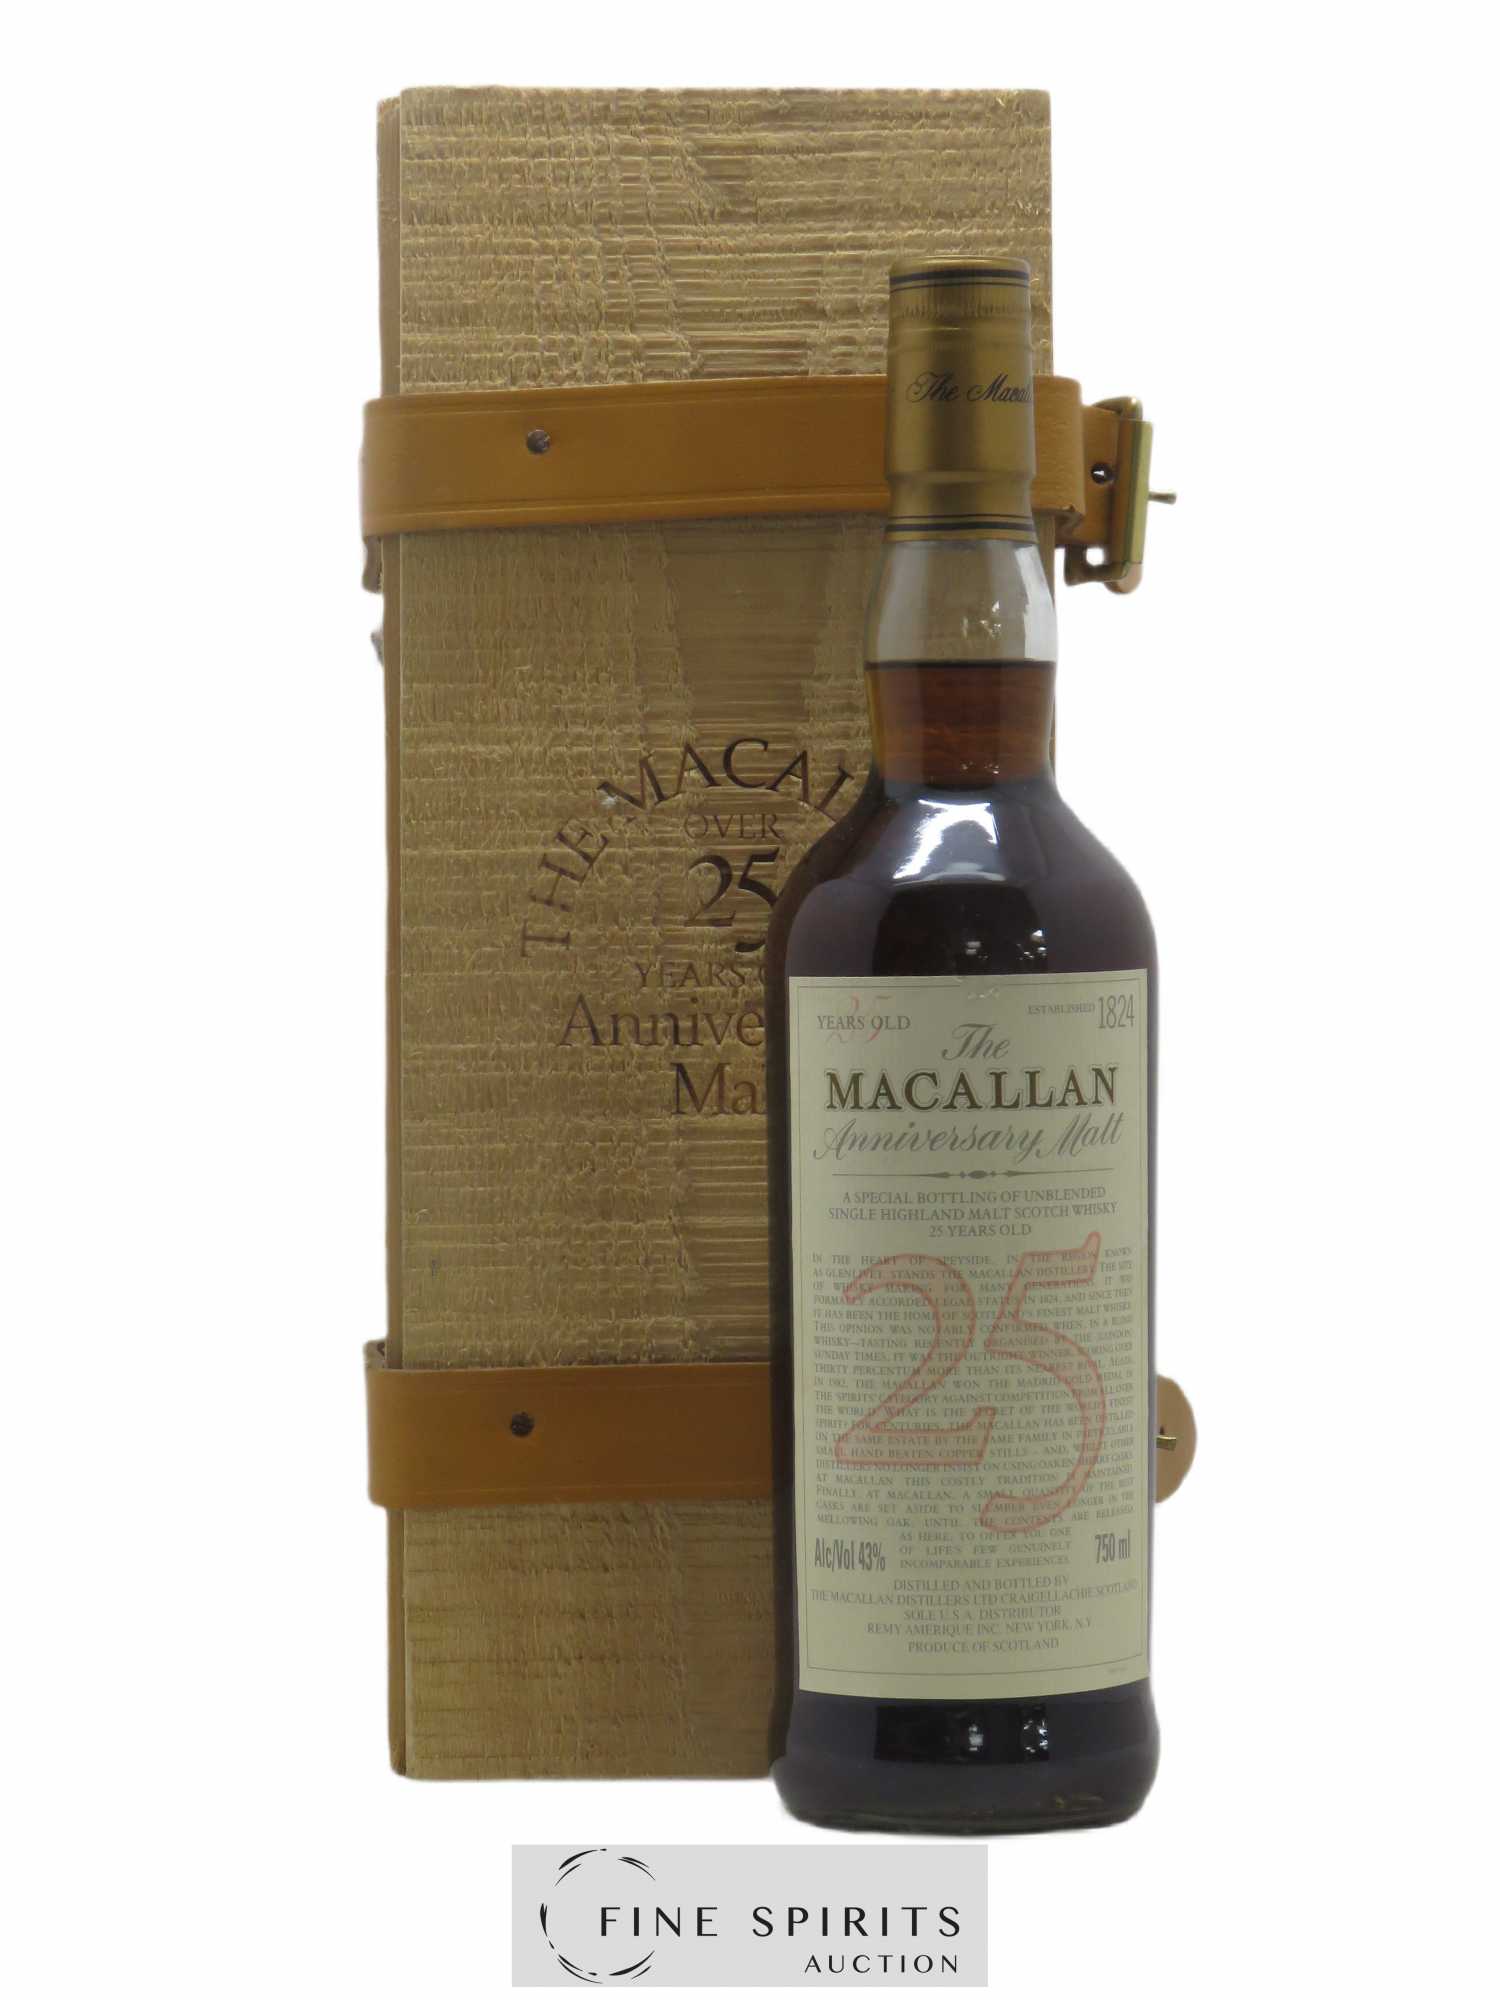 Macallan (The) 25 years Of. Anniversary Malt Special Bottling (75cl.)